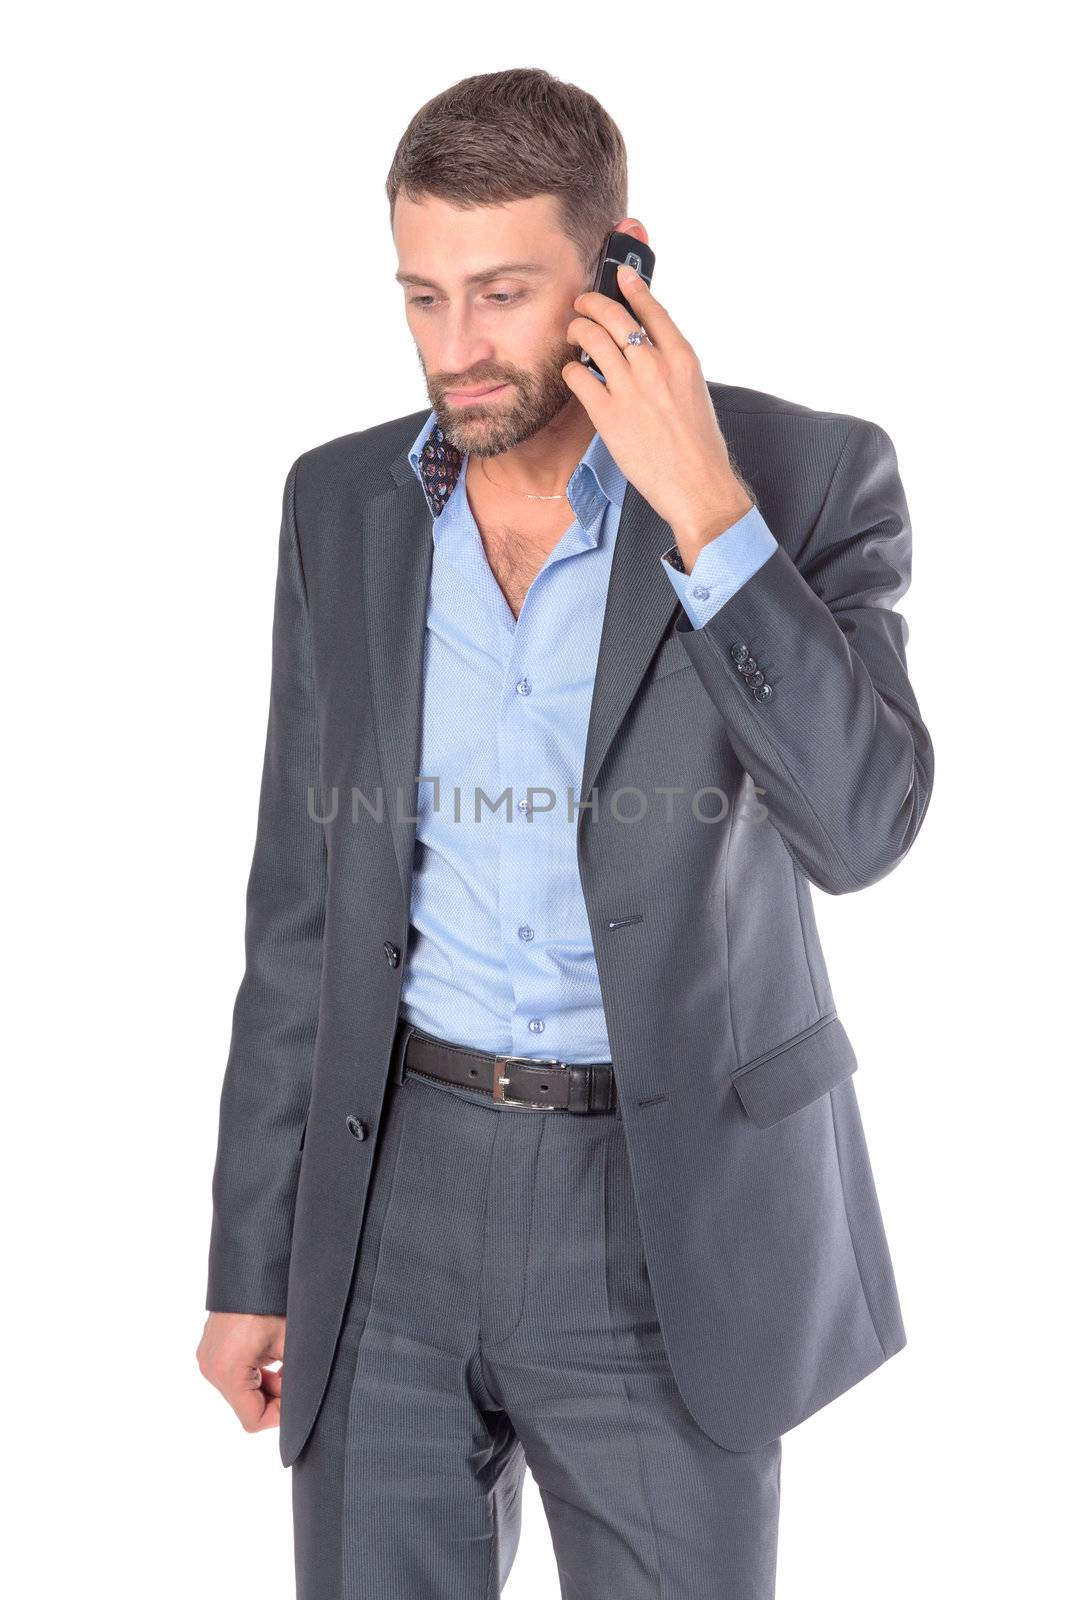 Portrait businessman with mobile phone, over white background